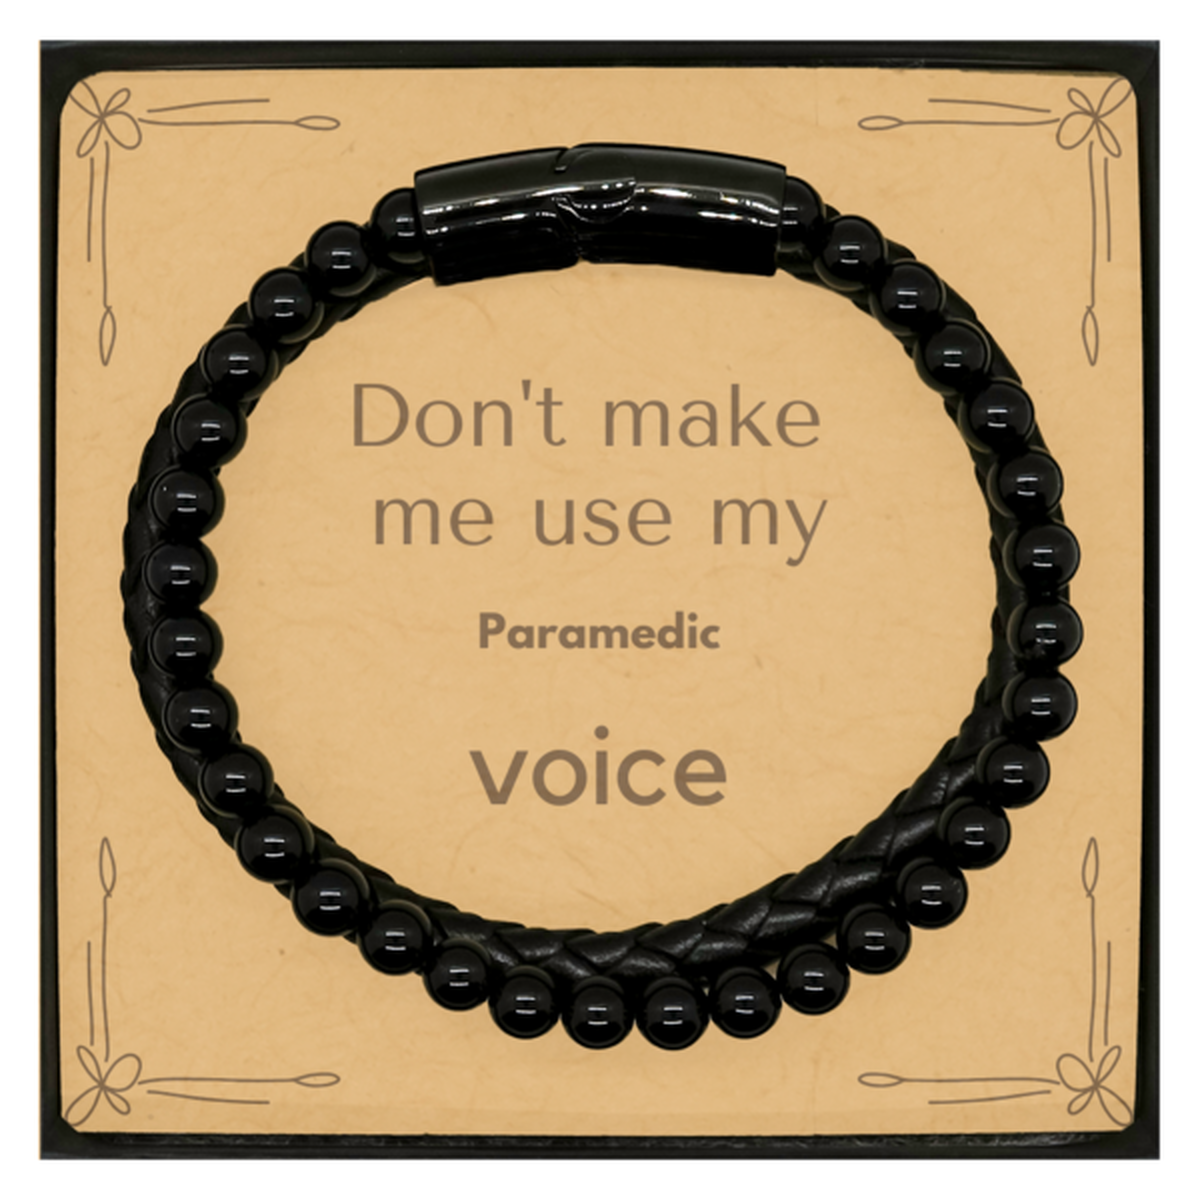 Don't make me use my Paramedic voice, Sarcasm Paramedic Card Gifts, Christmas Paramedic Stone Leather Bracelets Birthday Unique Gifts For Paramedic Coworkers, Men, Women, Colleague, Friends